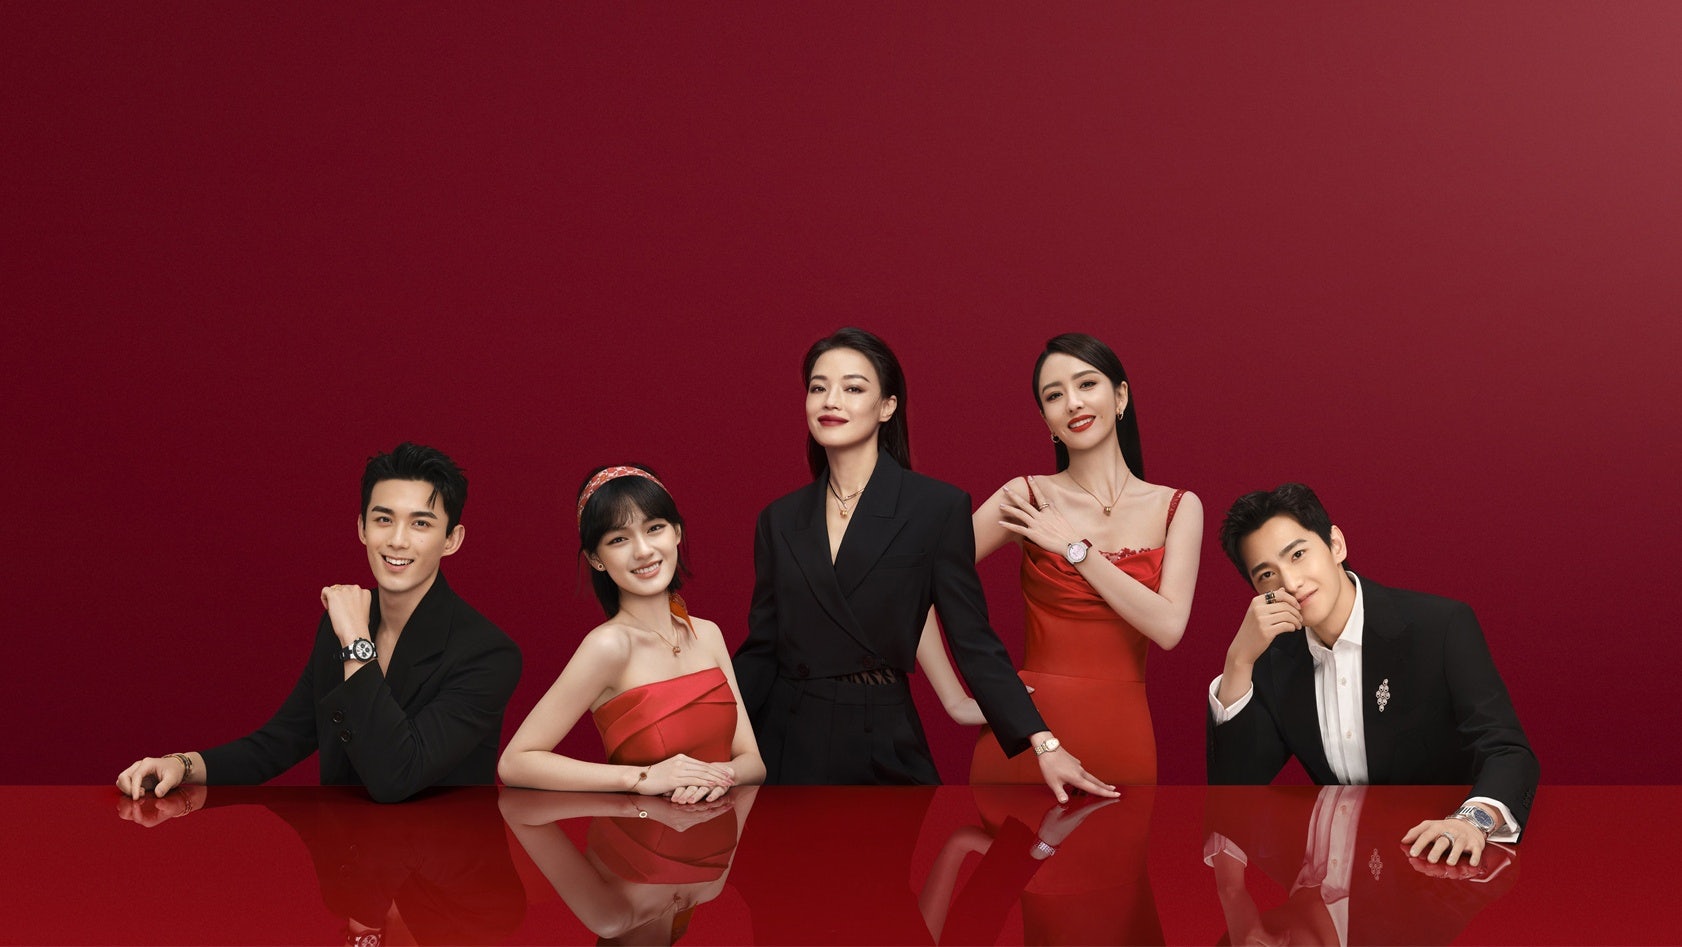 While Chinese New Year campaigns are often hit or miss, Bulgari strikes a cord with Chinese consumers by spotlighting exclusive products and traditional customs. Photo: Courtesy of Bulgari